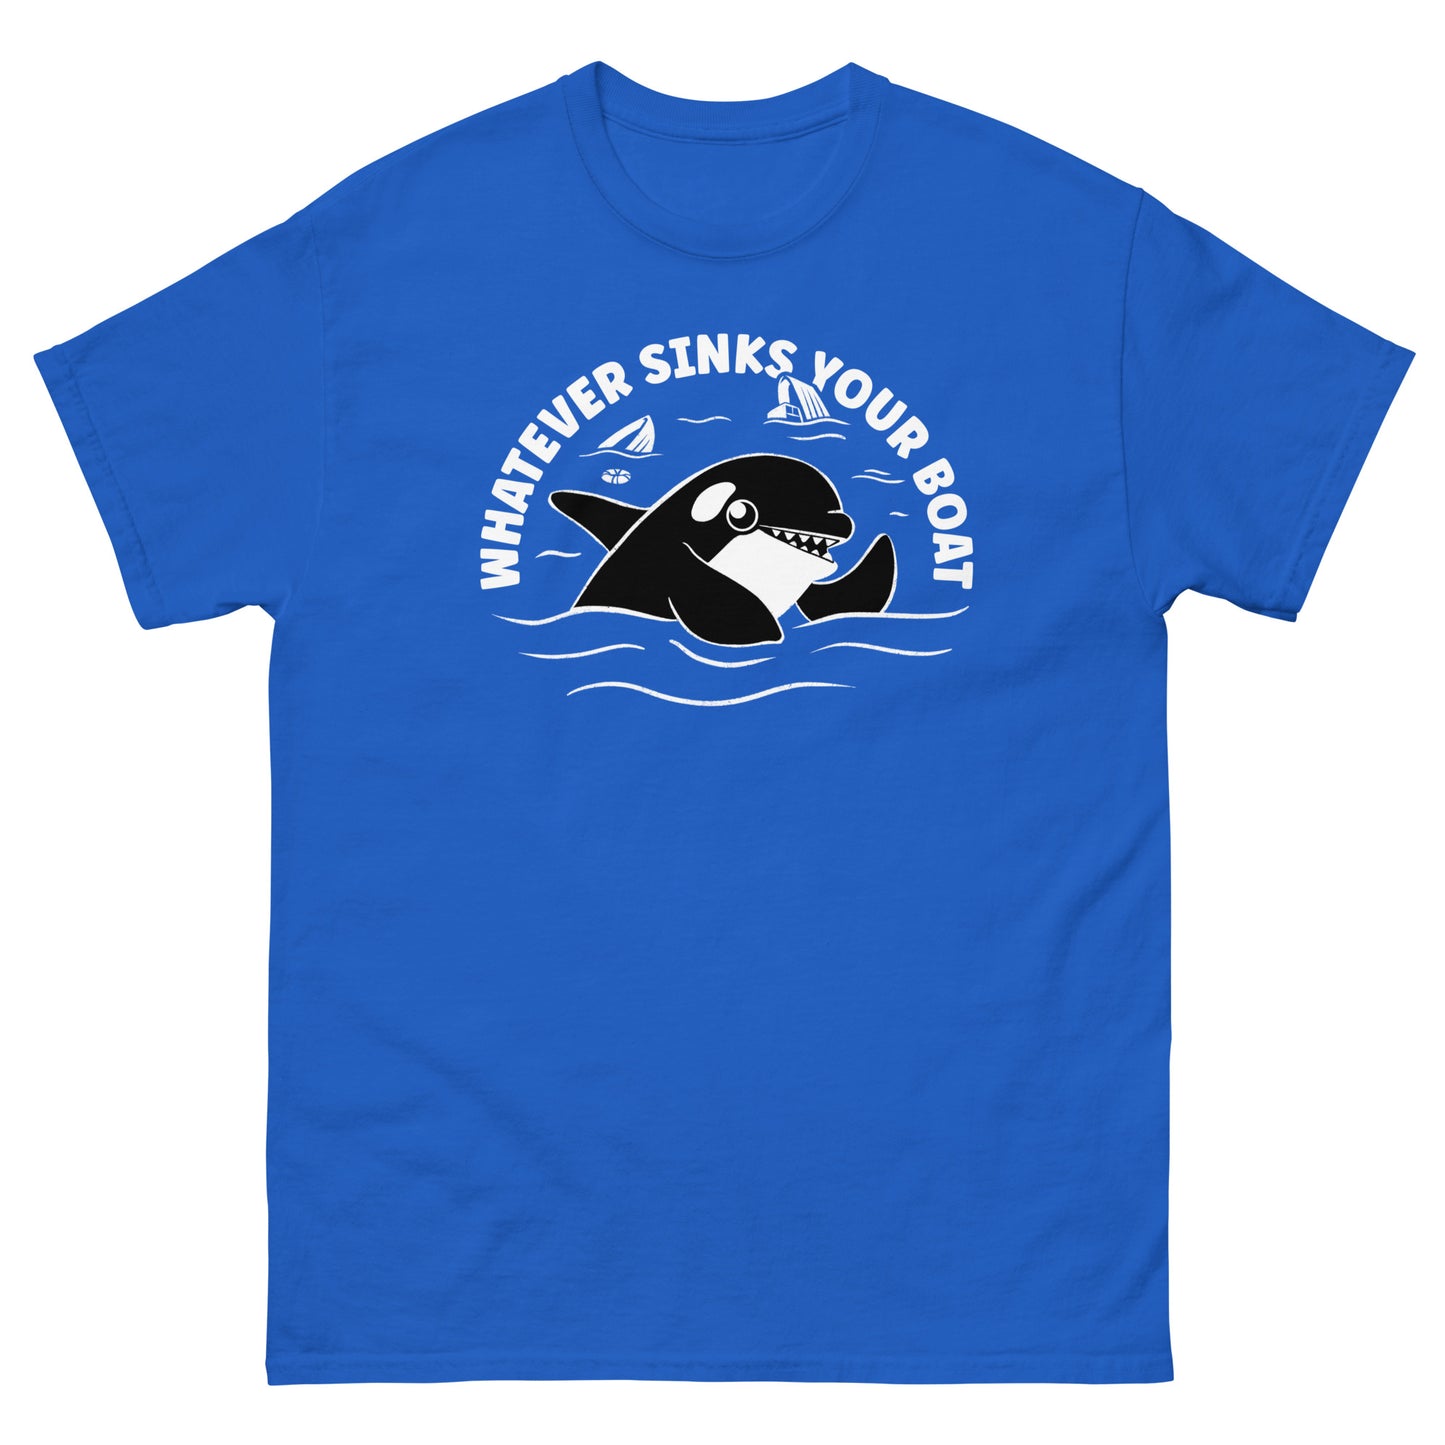 Whatever Sinks Your Boat - Funny Orca Attack Boats Tee